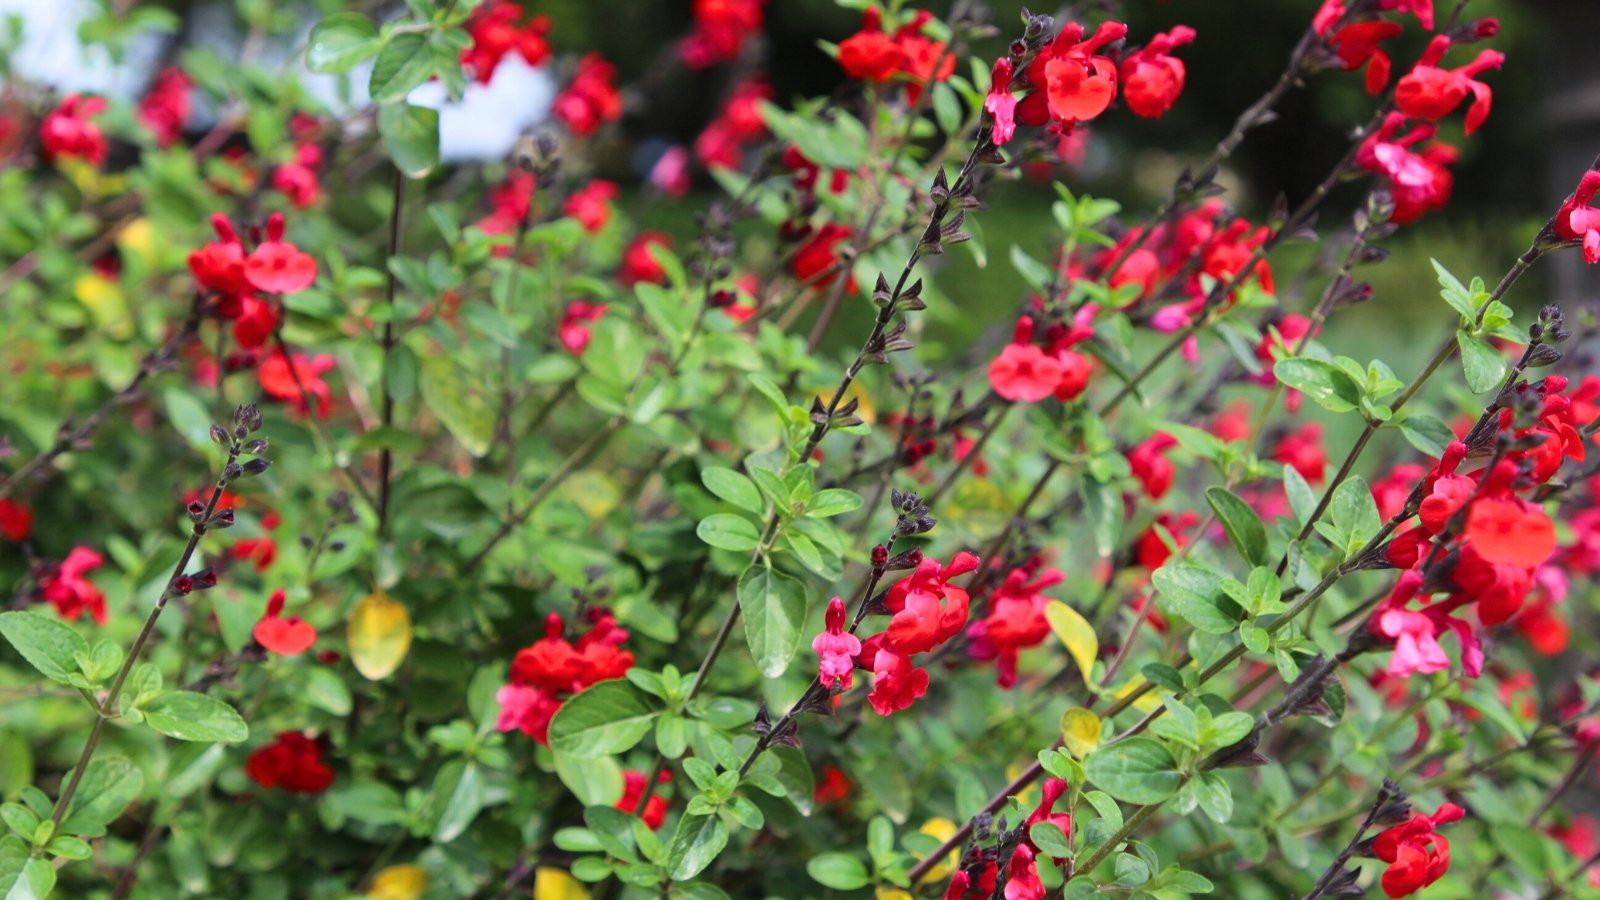 The Autumn Sage presents vibrant red tubular flowers against a backdrop of yellowing leaves, creating a contrasting yet captivating display in the garden.